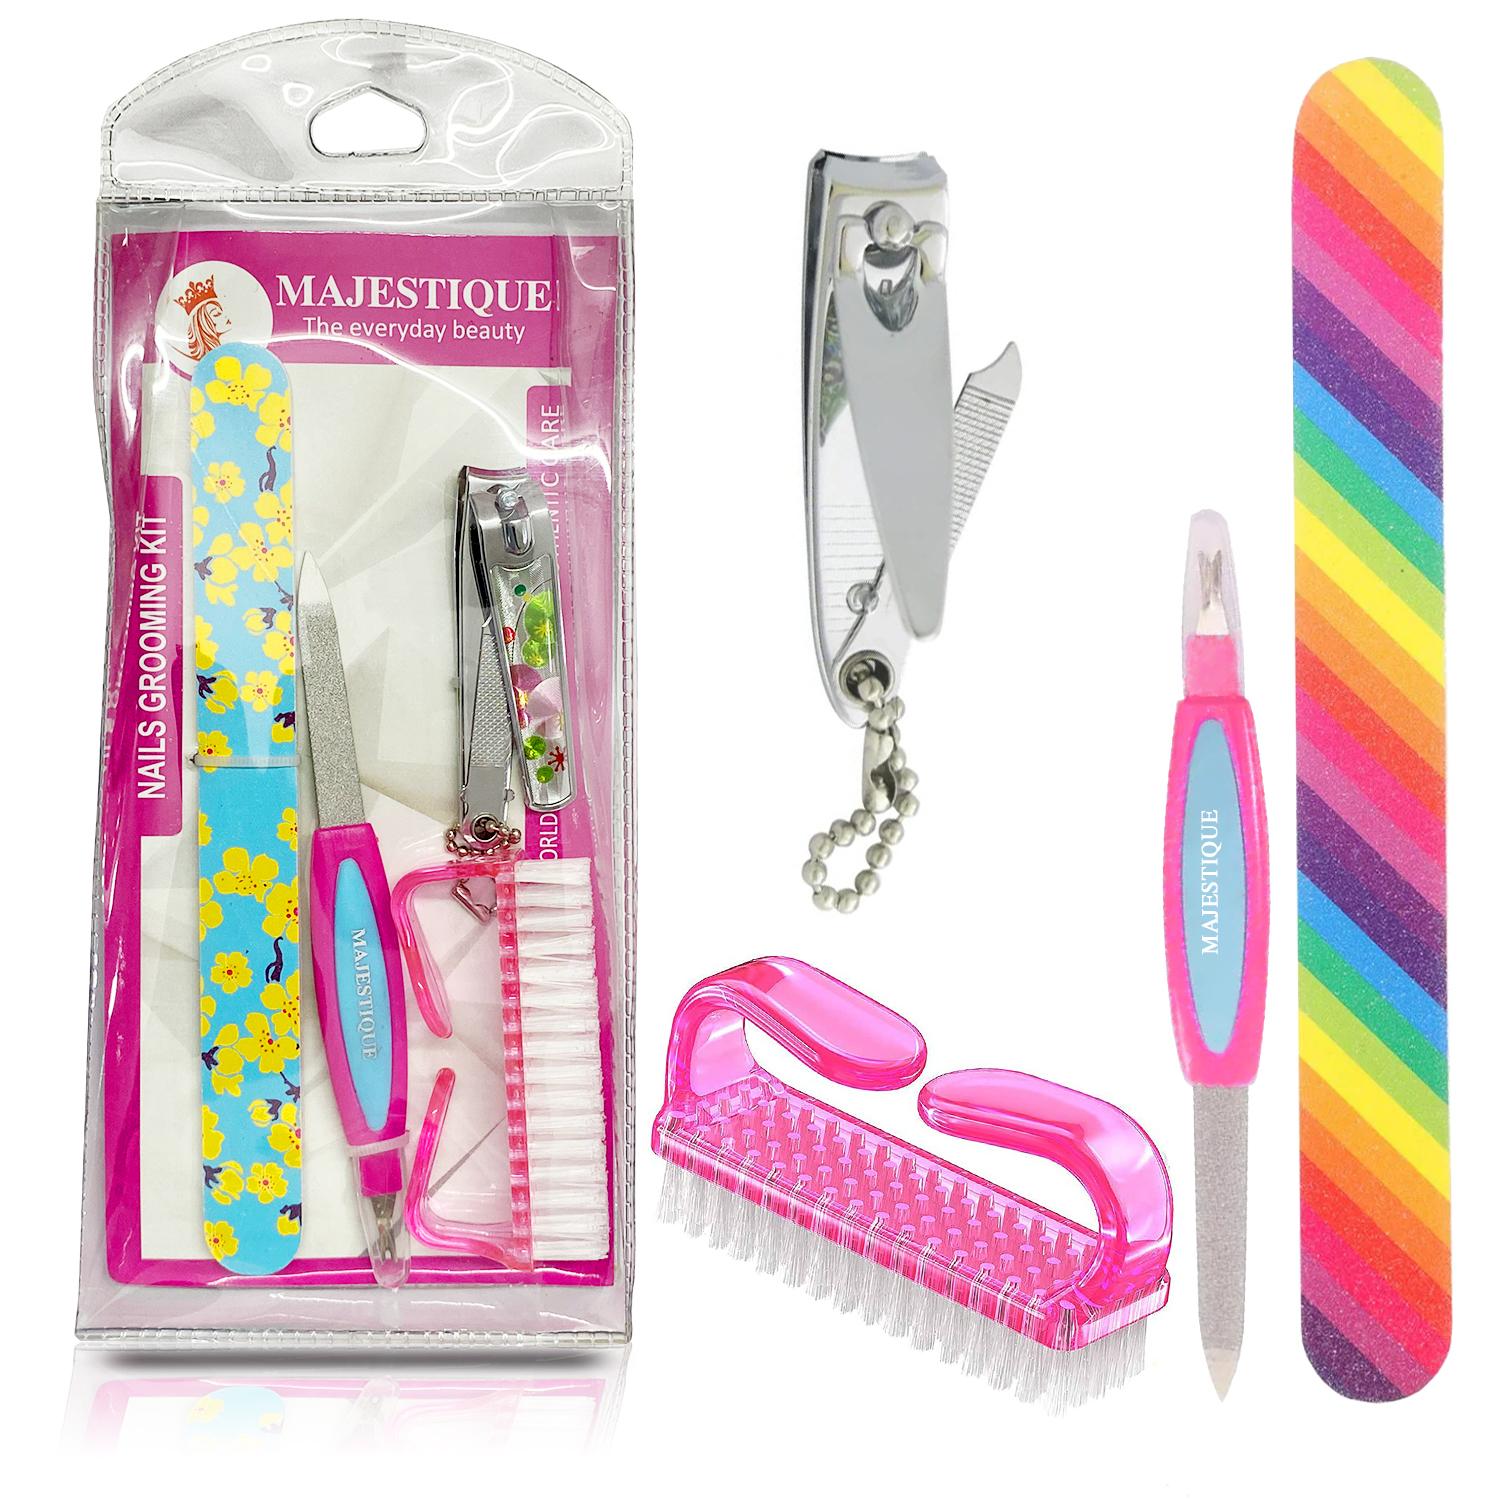 Majestique Nails Grooming Kit, Nail Filer, Nail Cutter and Brush for Manicure and Pedicure - Multicolor